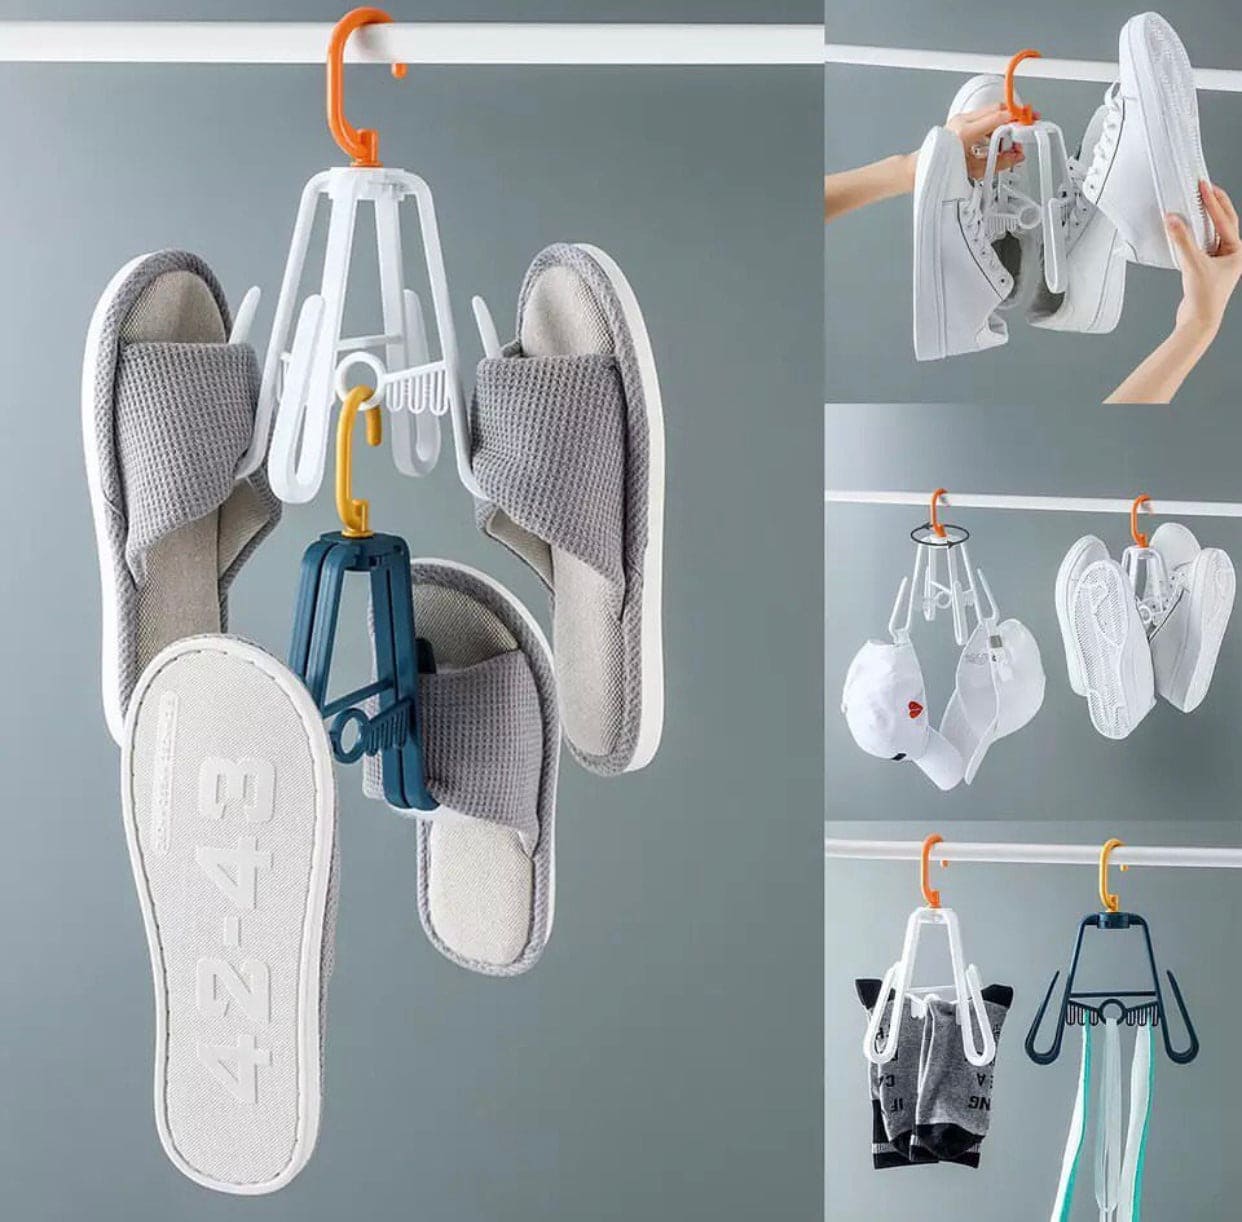 Multipurpose Plastic Shoe Drying Rack, Windproof Clothes Holder, Sandals Hook Home Organizing Tool